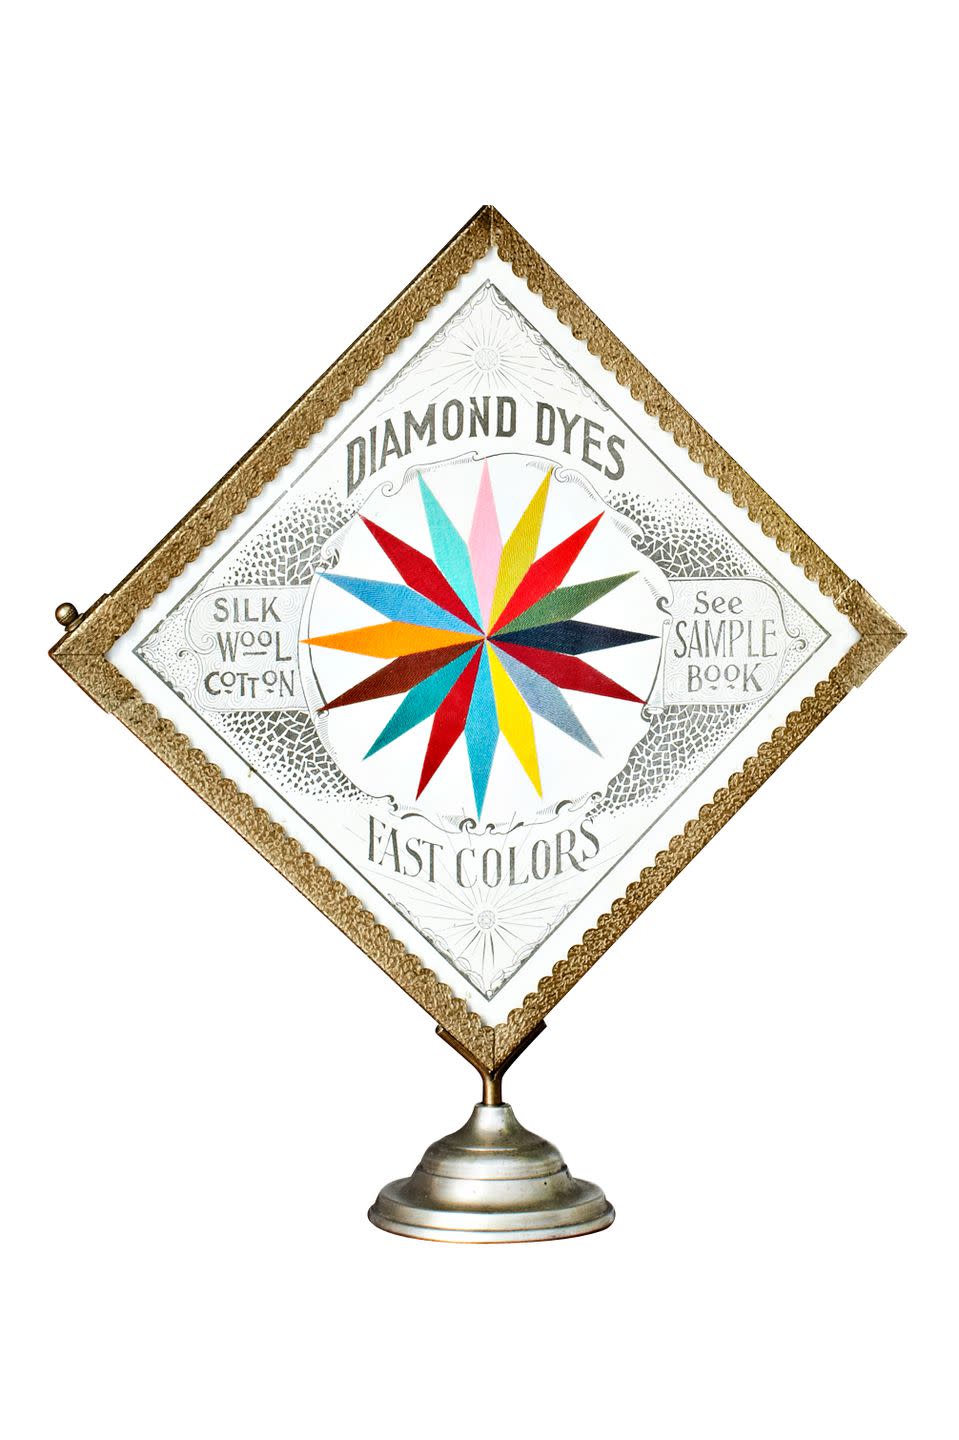 Early-20th-Century Diamond Dyes Color Card